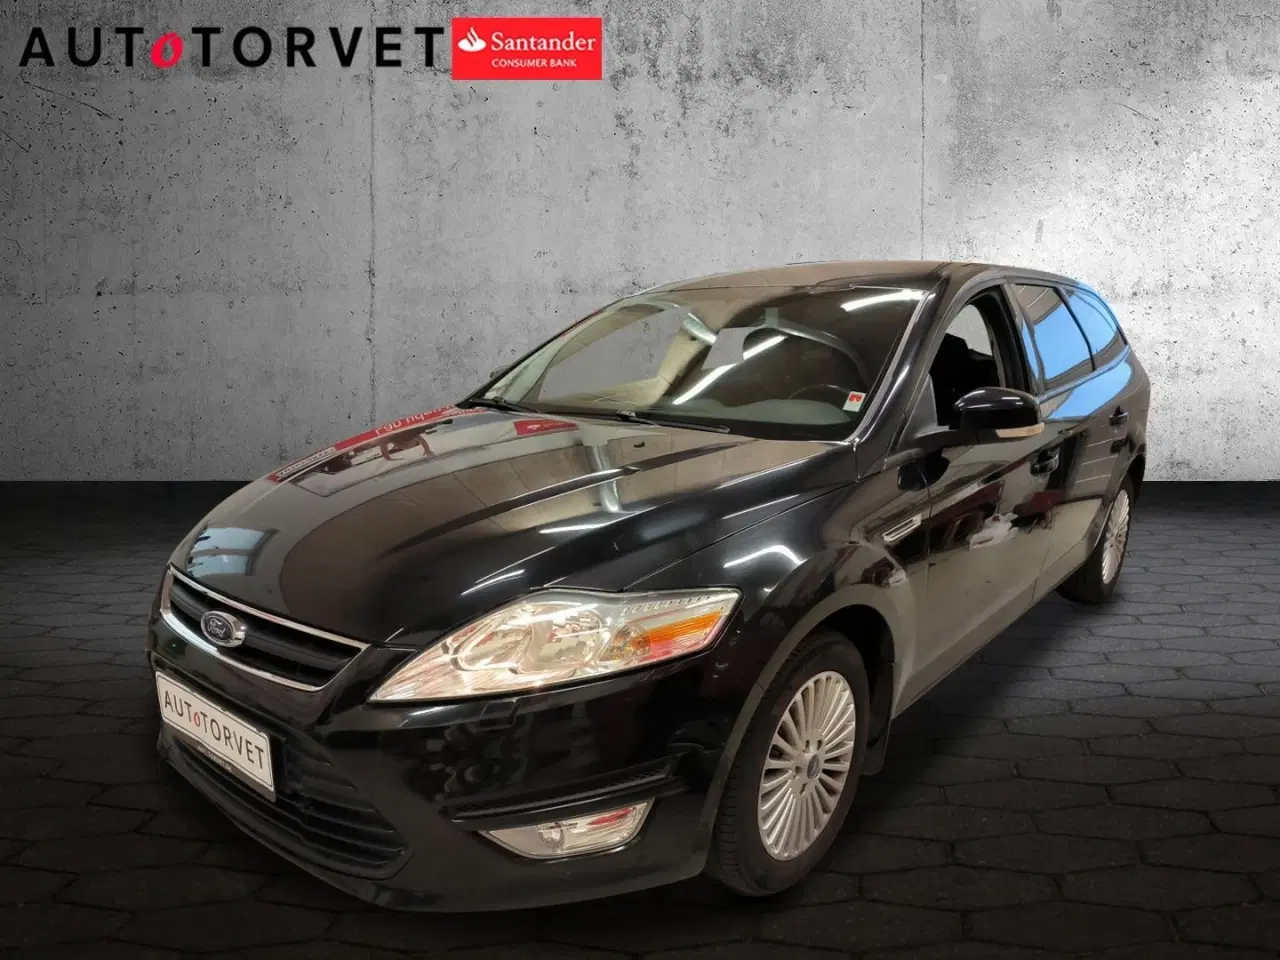 Billede 1 - Ford Mondeo 2,0 TDCi 140 Trend Coll stc. aut.